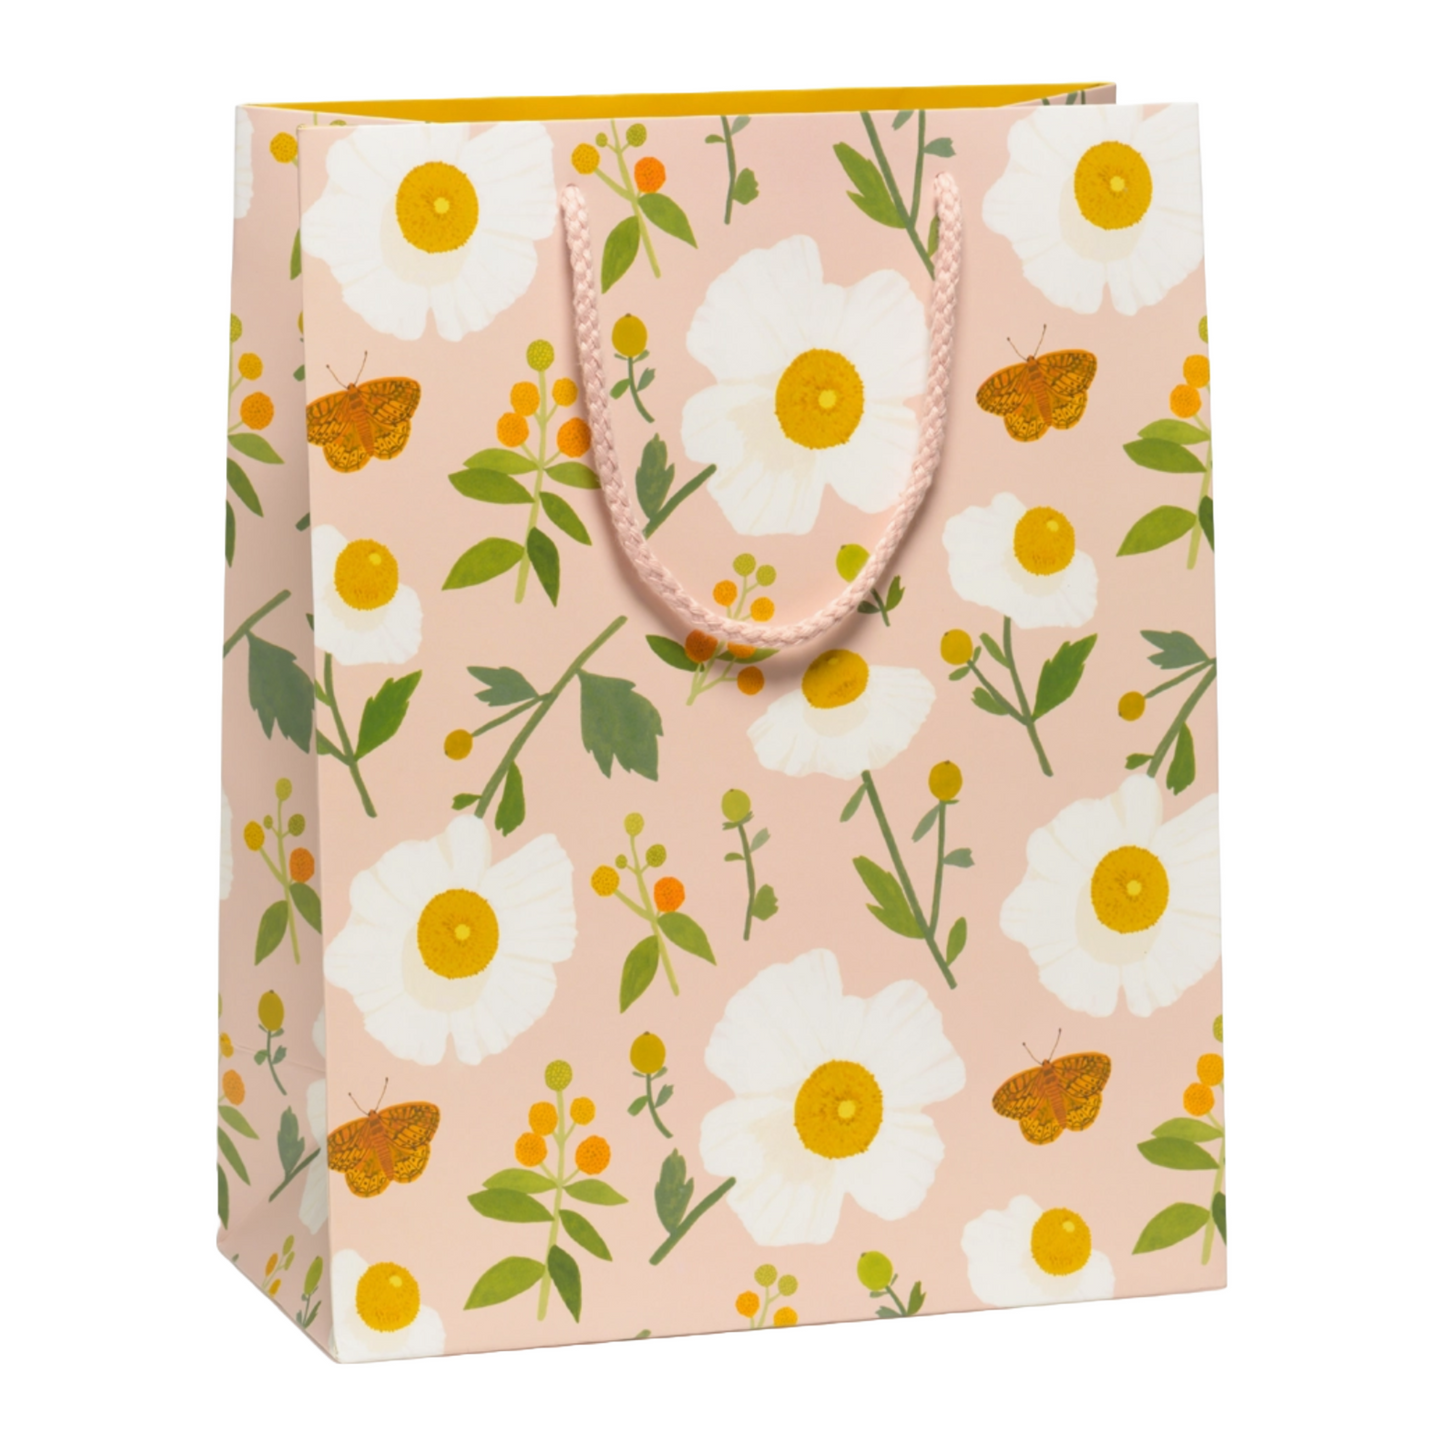 Large White Poppies Gift Bag by Red Cap Cards